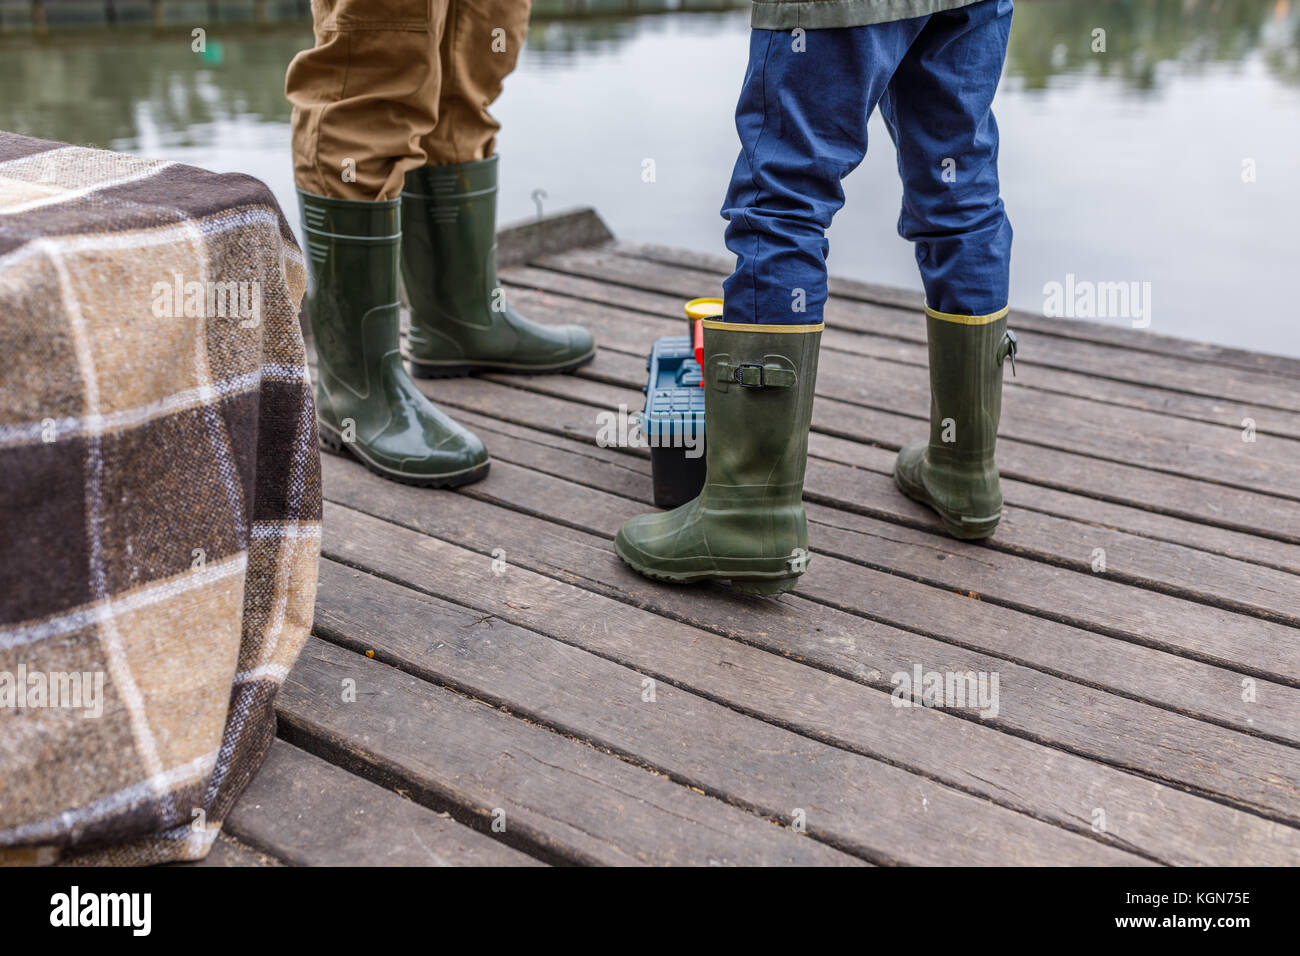 https://c8.alamy.com/comp/KGN75E/father-and-son-in-rubber-boots-KGN75E.jpg